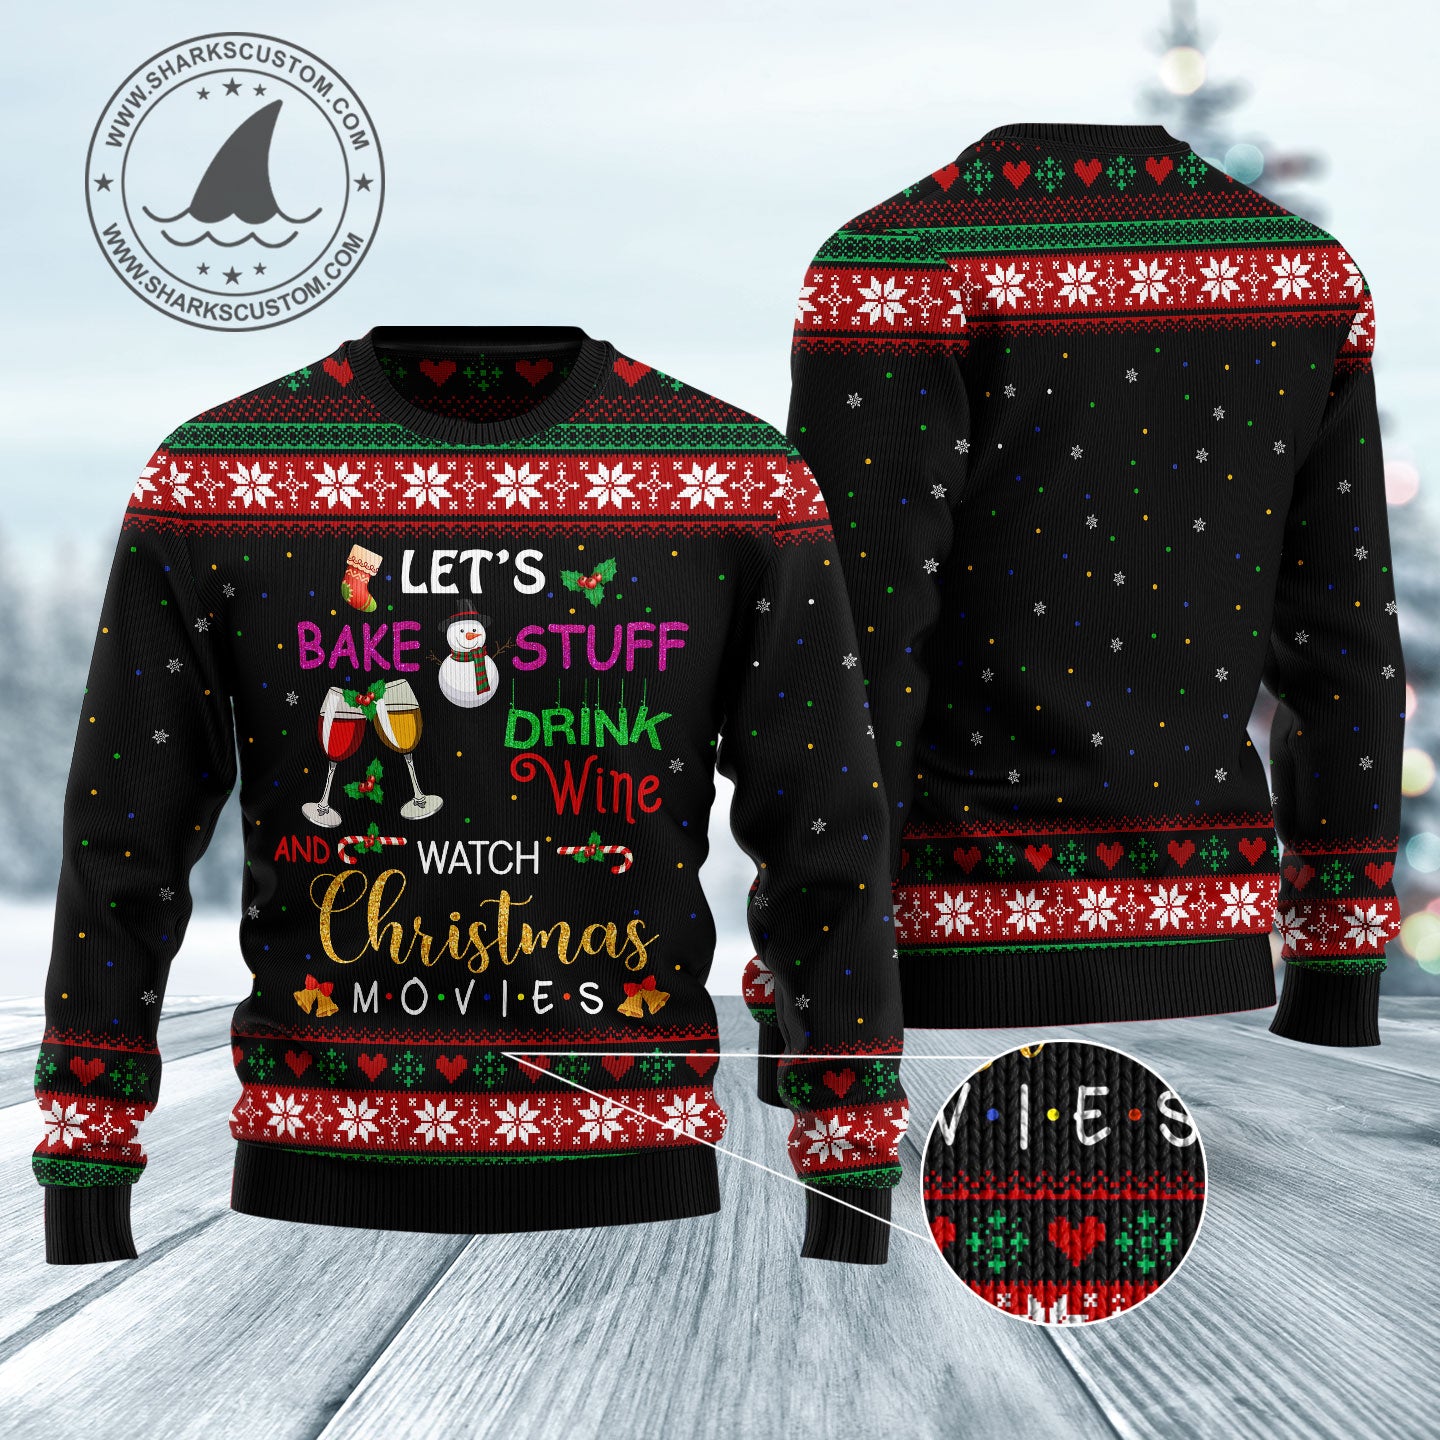 Drink wine and watch christmas movies HZ102802 Ugly Christmas Sweater